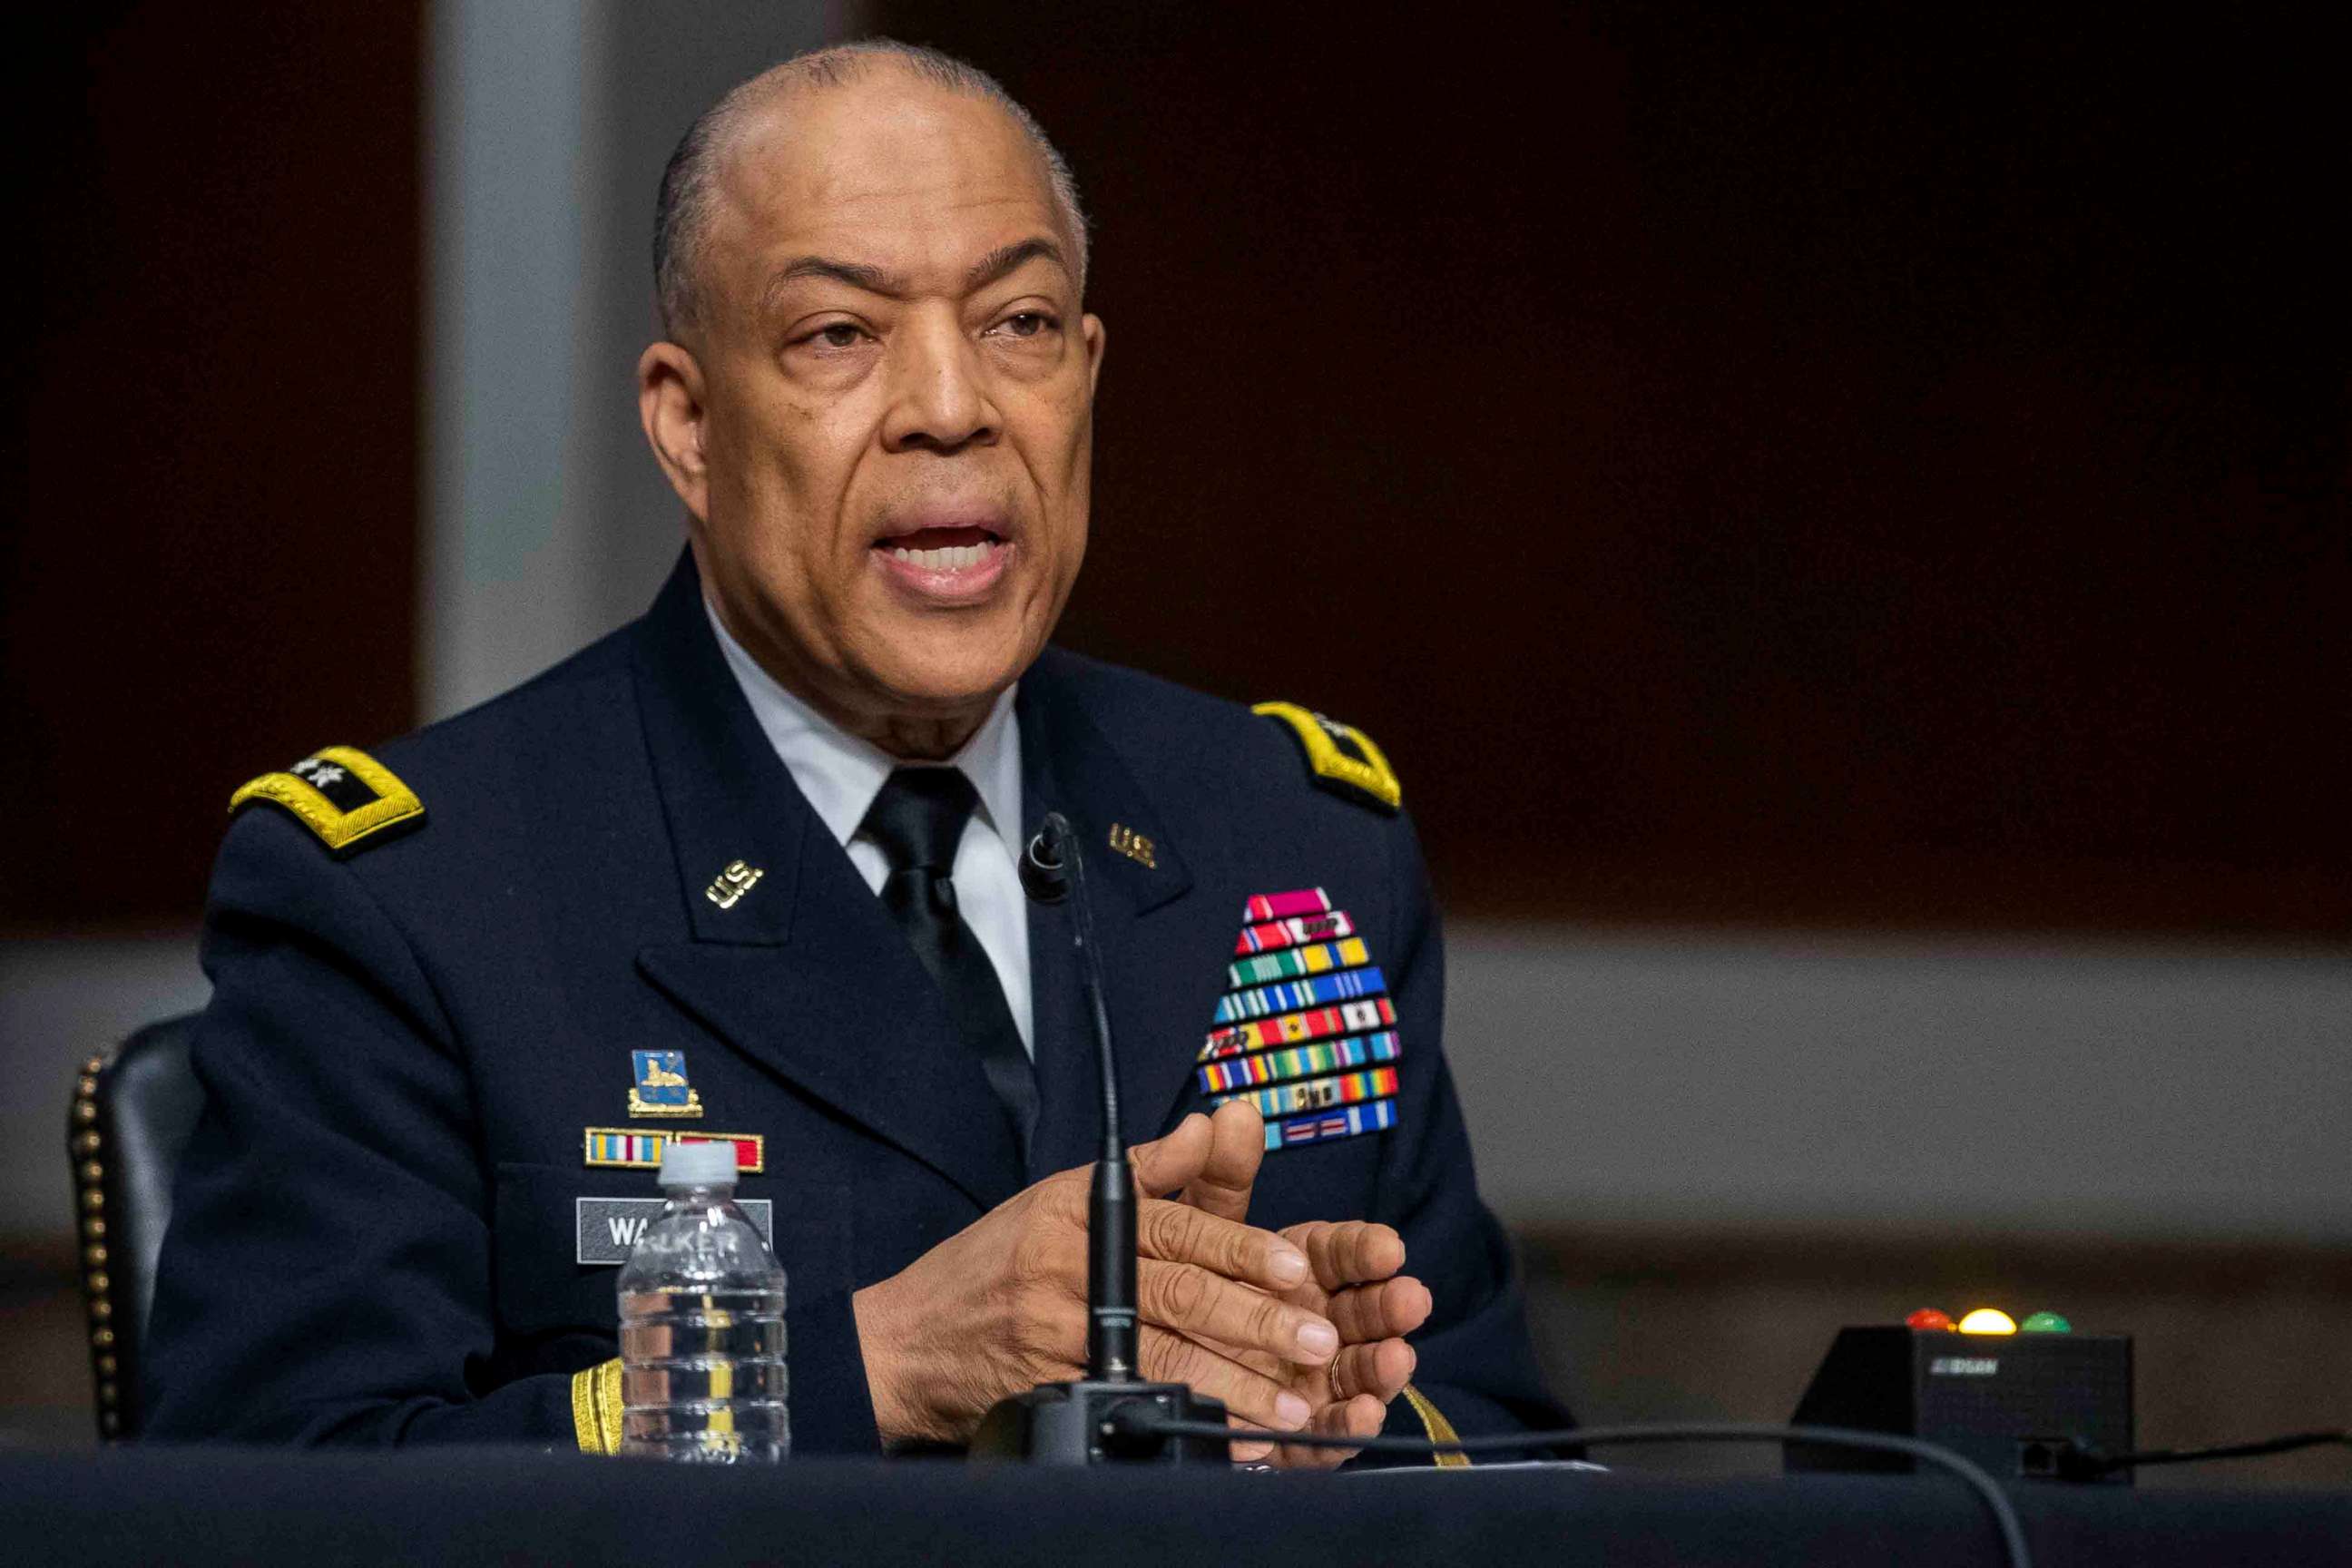 PHOTO: Commanding General District of Columbia National Guard Major General William J. Walker testifies on Capitol Hill about the Jan. 6, 2021 attack on the U.S. Capitol, in Washington on March 3, 2021.